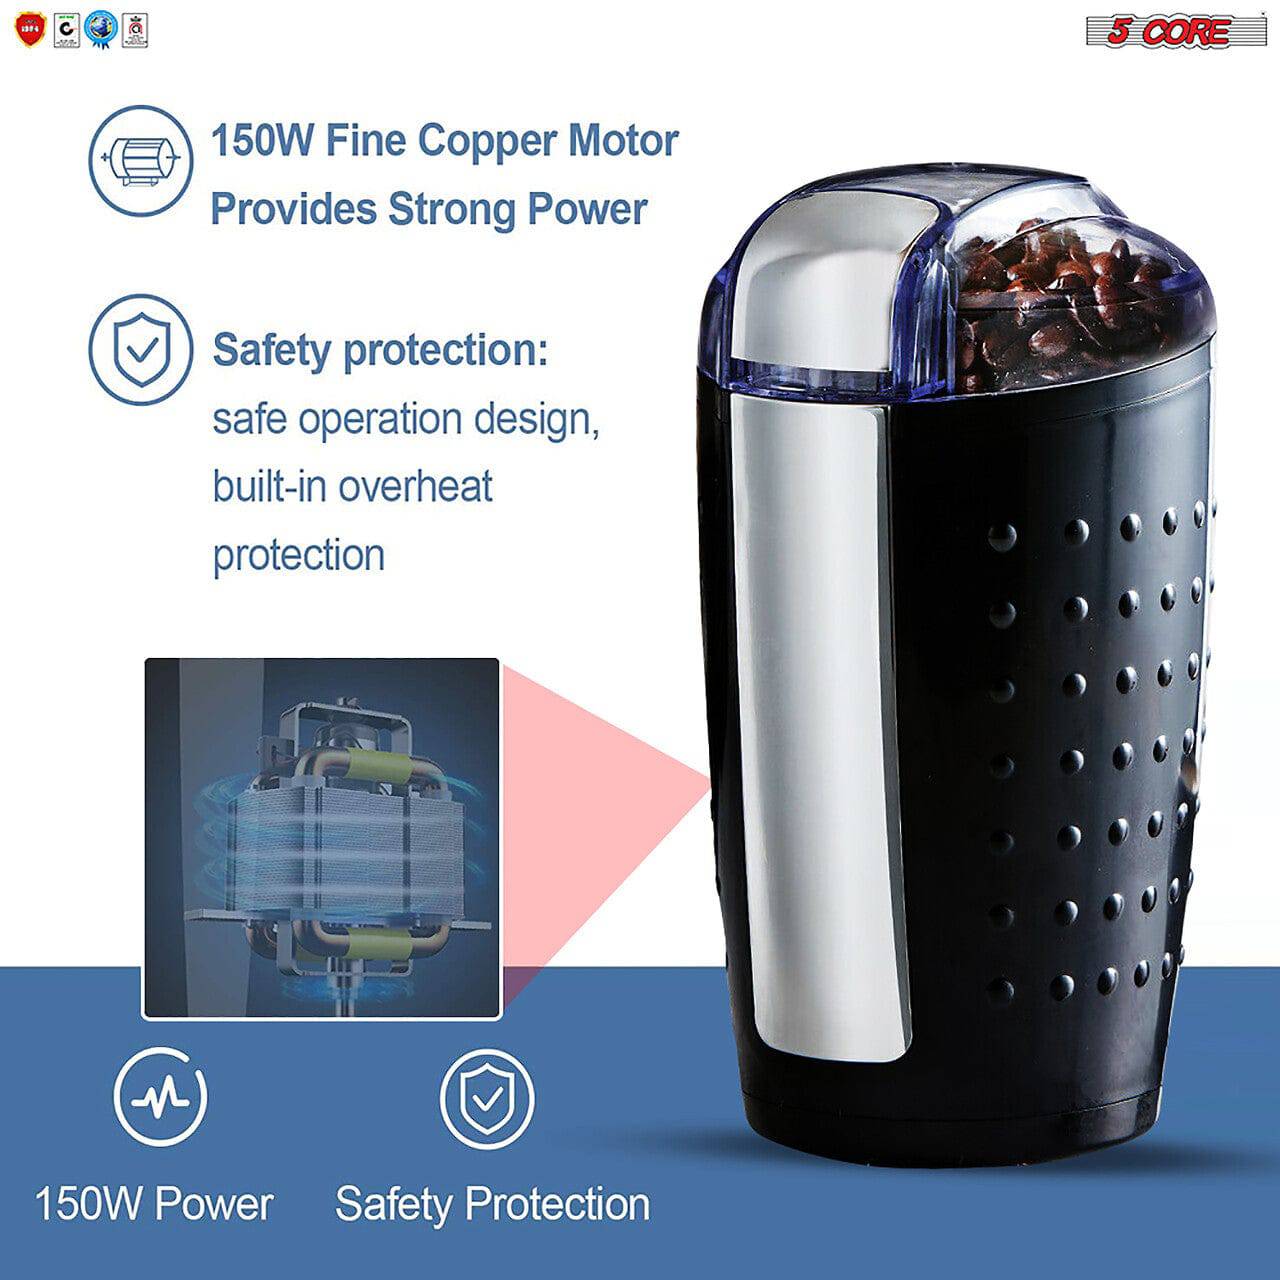 5Core Electric Coffee Grinder -Stainless Steel -4.5oz Capacity with Easy On/Off  5 Core CG 01 Black & Brown